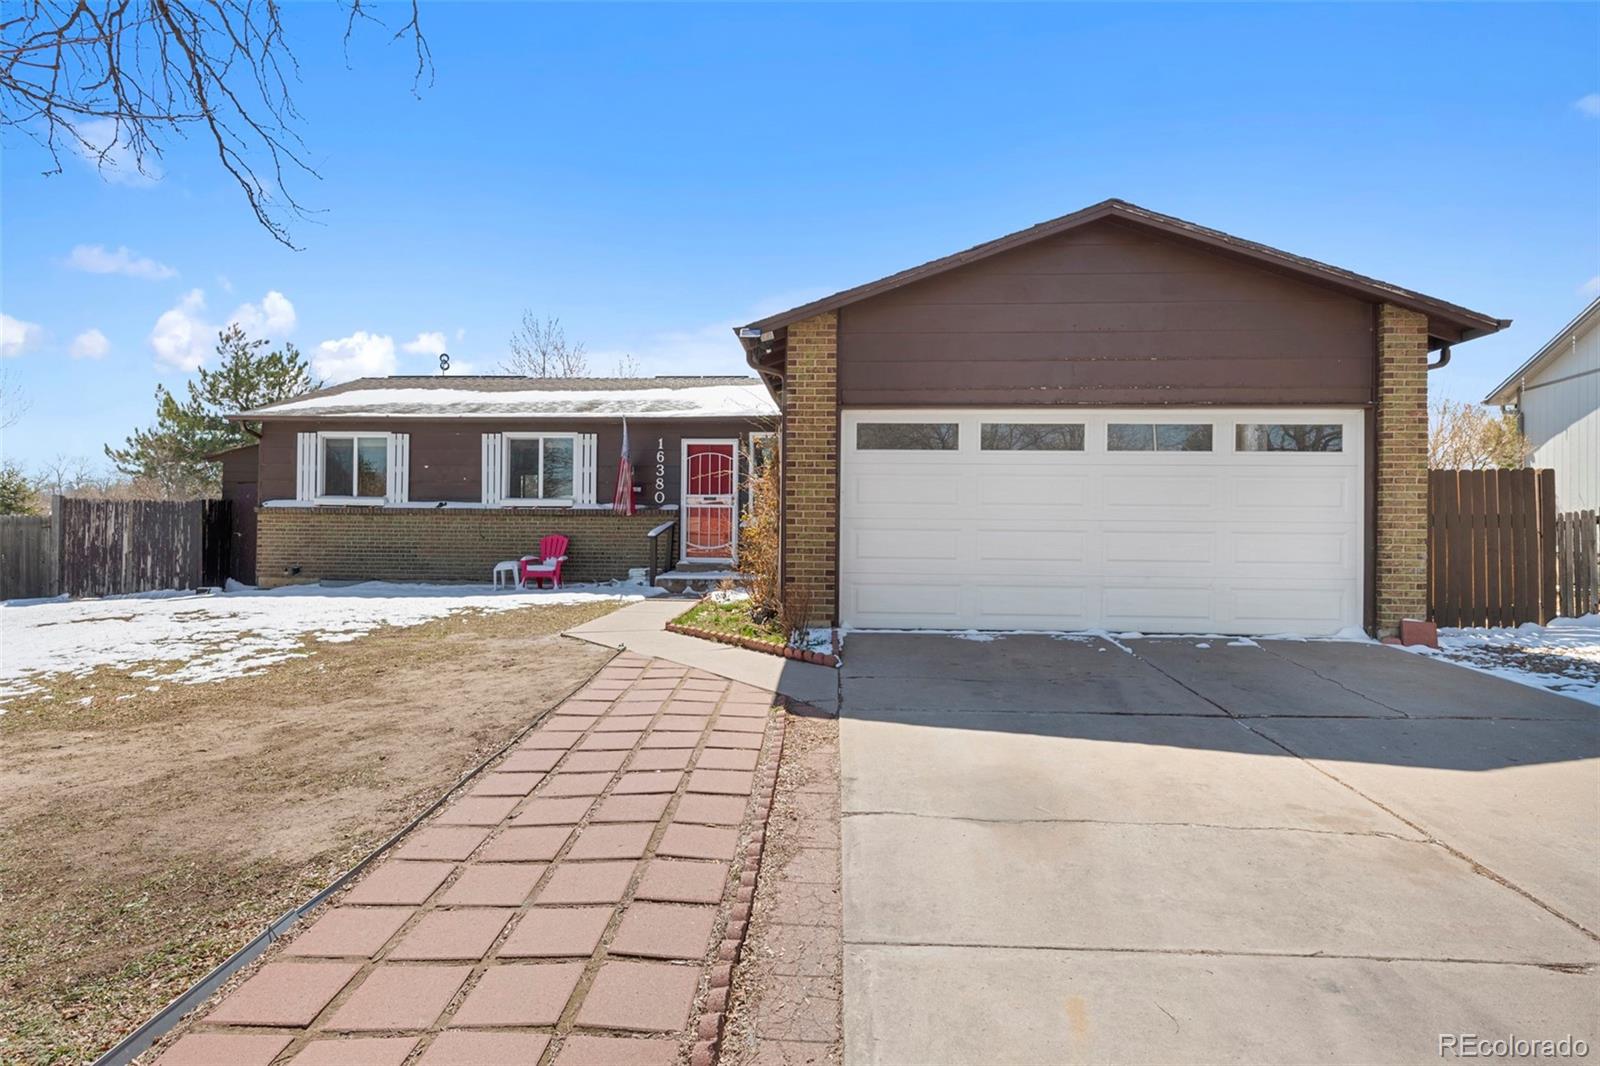 16380 e bates drive, aurora sold home. Closed on 2024-04-15 for $440,000.